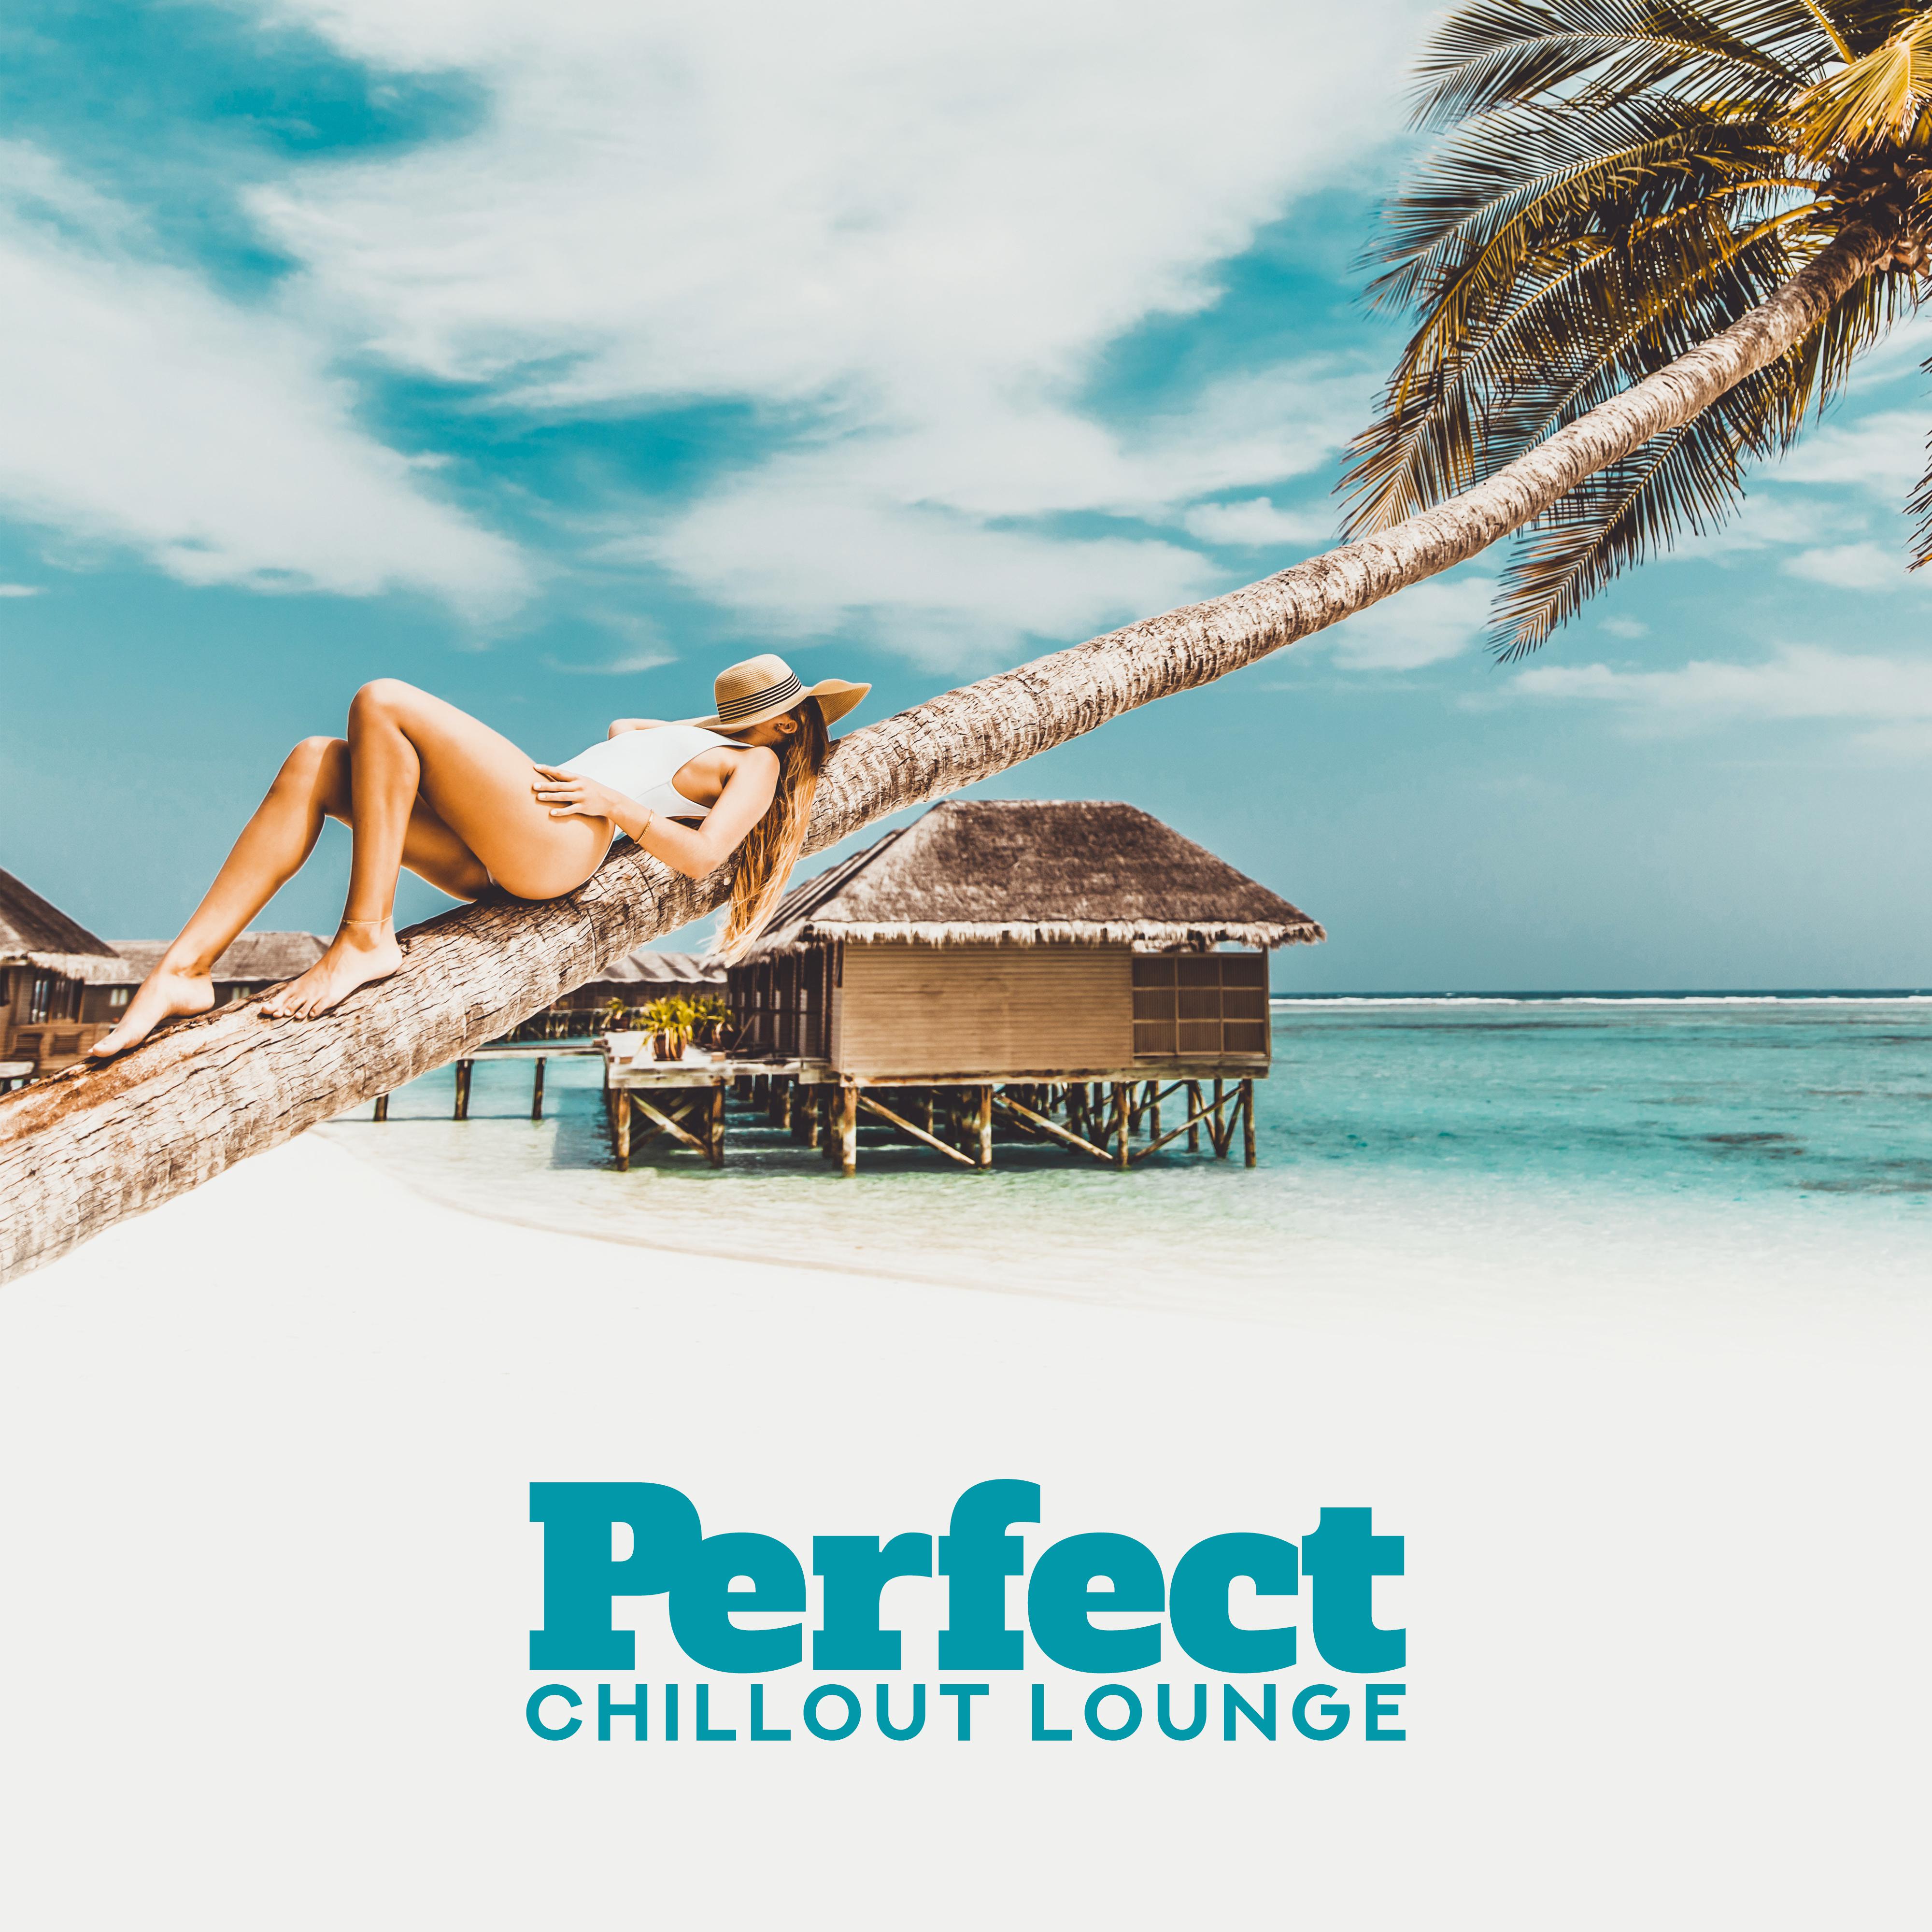 Perfect Chillout Lounge: Beach Music, Peaceful Chillout, Hotel Bar, Cocktail Music, Summer Vibes, Ibiza Chill Out 2019